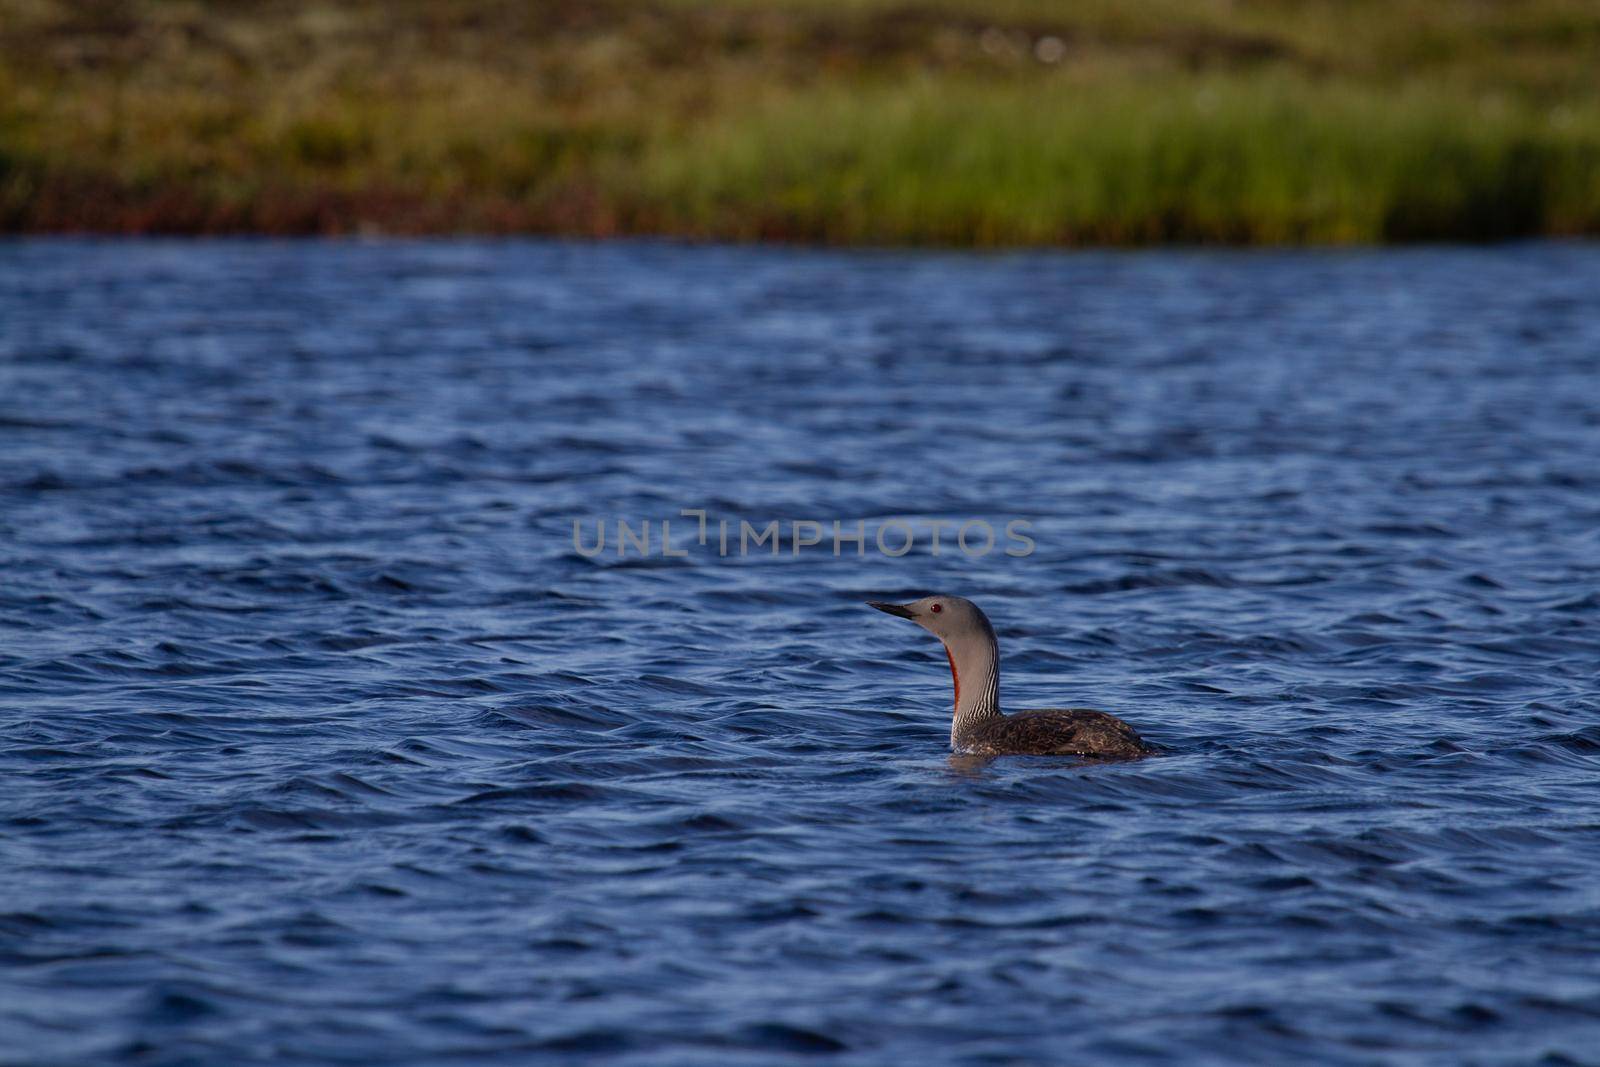 Red-throated Loon, Gavia stellata, swimming blue arctic waters with tundra grass in the background, near Arviat Nunavut